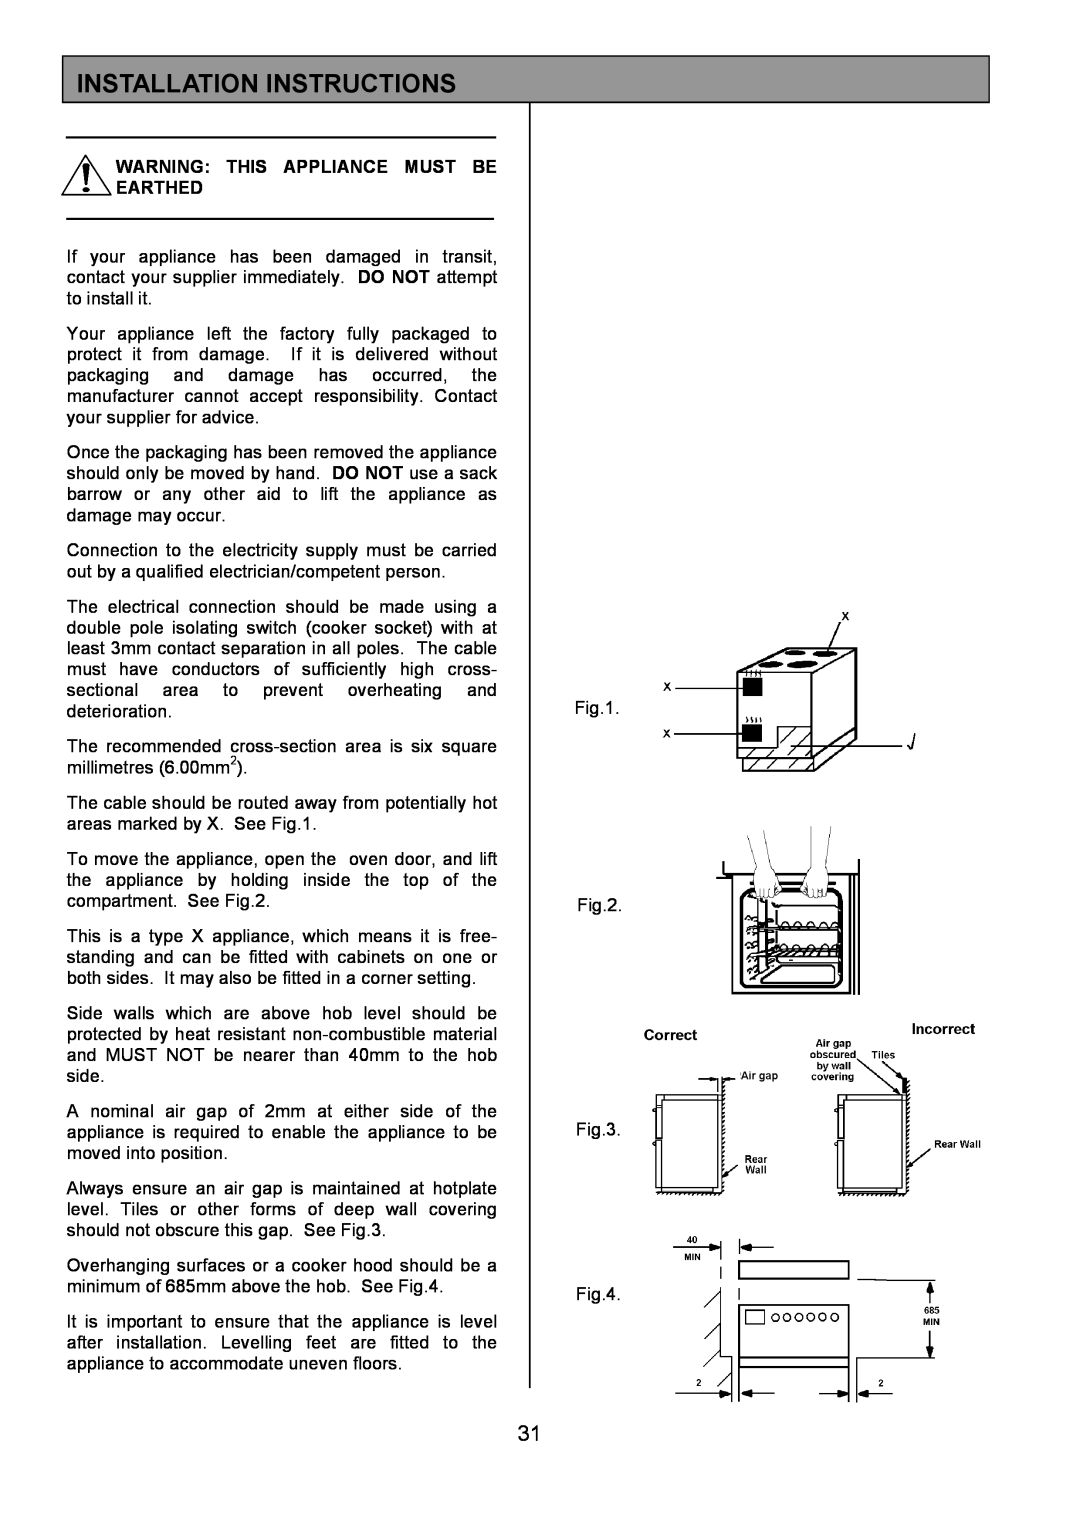 Zanussi ZCE 7690, ZCE 7680 manual Installation Instructions, Warning: This Appliance Must Be Earthed 